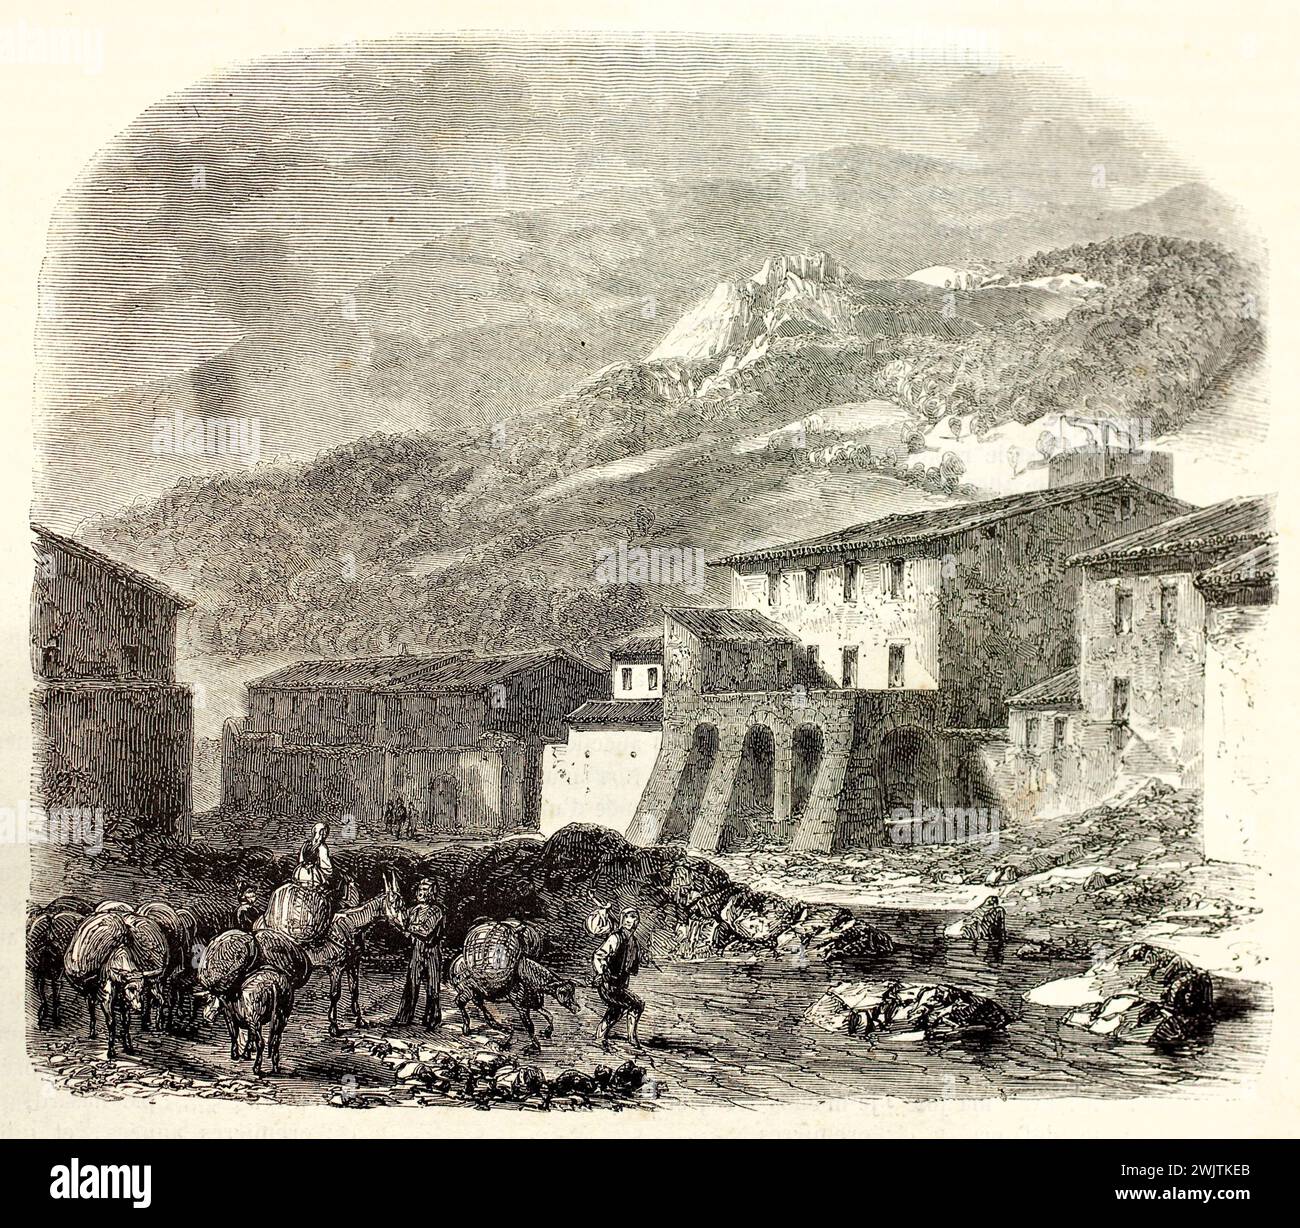 Old engraved illustration of La Jonquera, Spain. Crerated by Blanchard, published on Magasin Pittoresque, Paris, 1852 Stock Photo